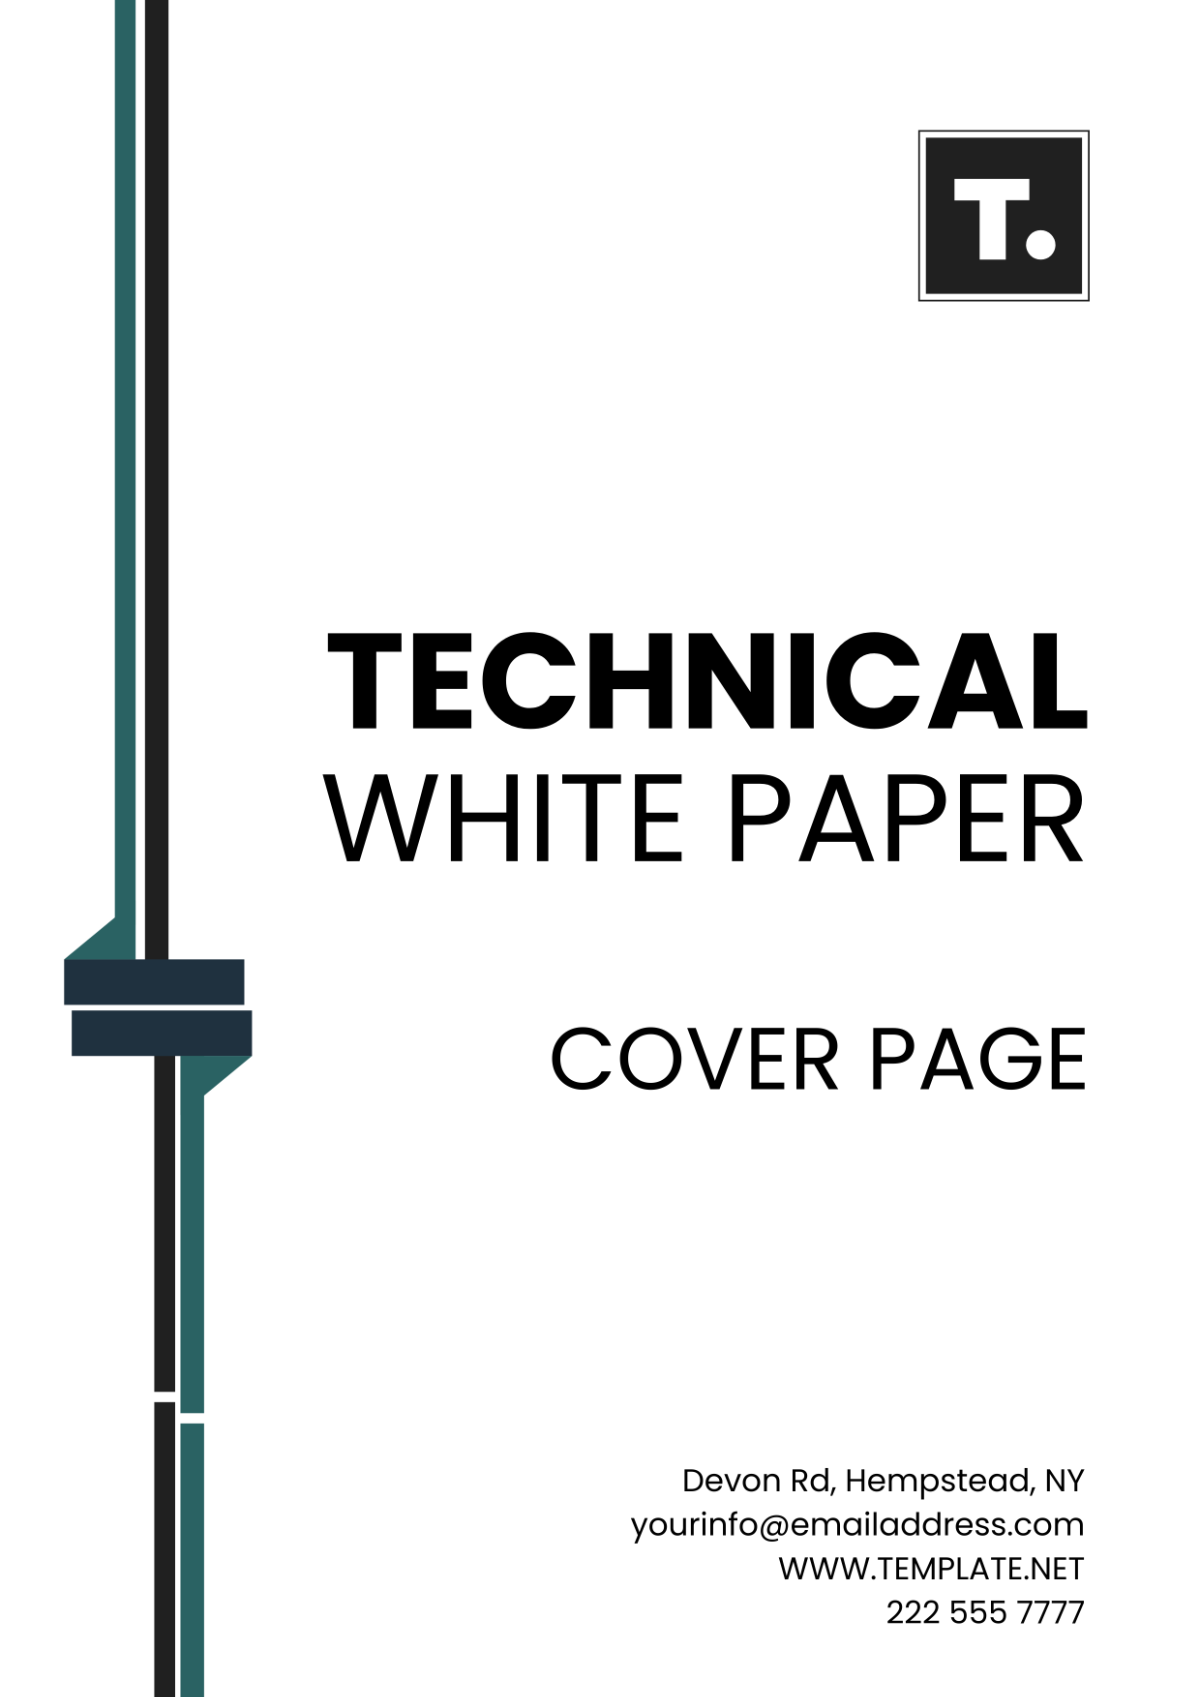 Technical White Paper Cover Page